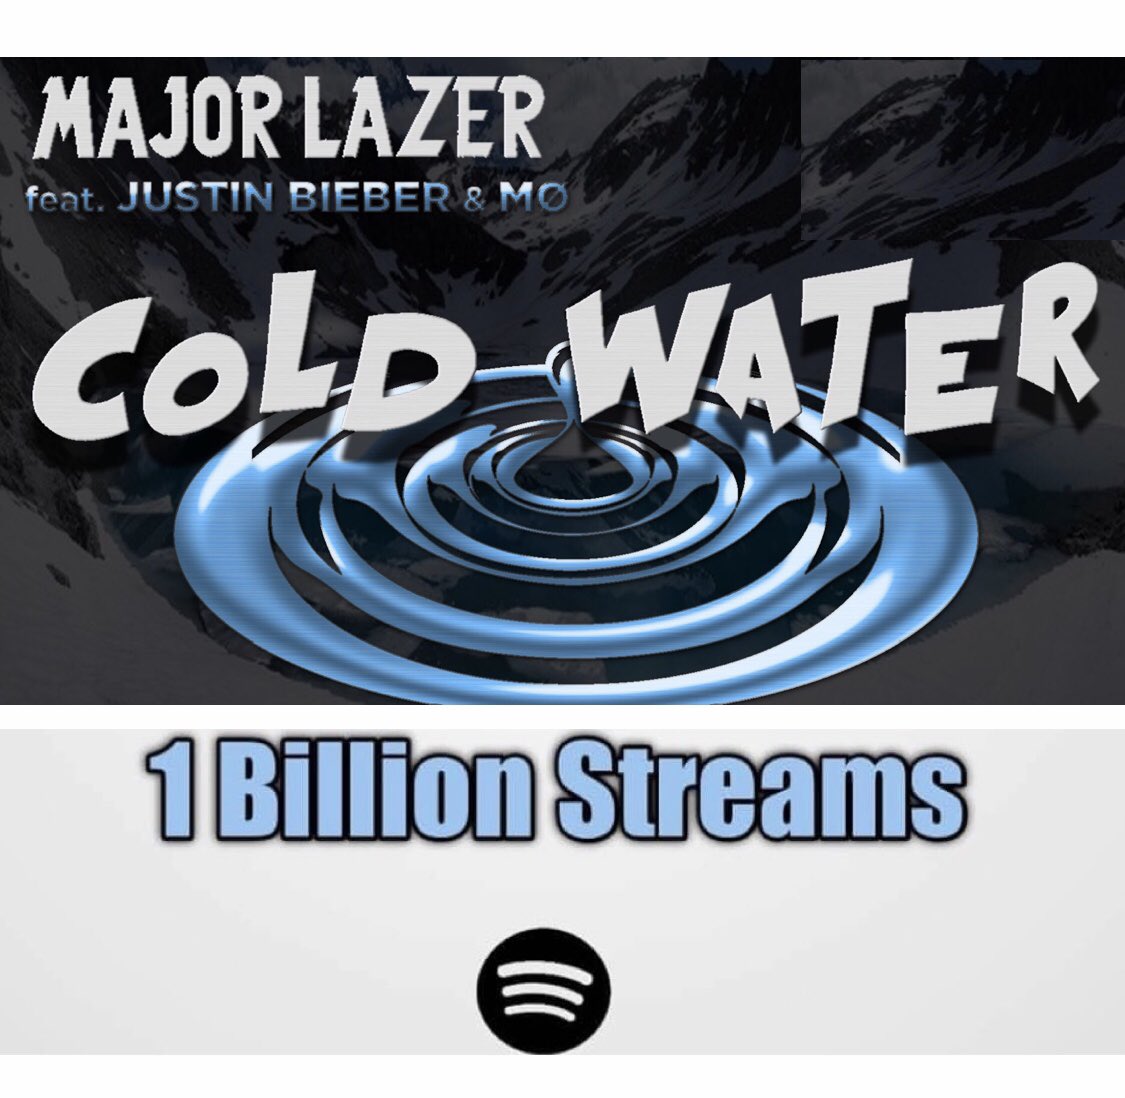 Justin Bieber Crew Sur Twitter Congratulations The Hit Song Cold Water By Major Lazer Featuring Justin Bieber And Mo Has Just Exceeded 1 Billion Streams On Spotify Justin Bieber Is Currently